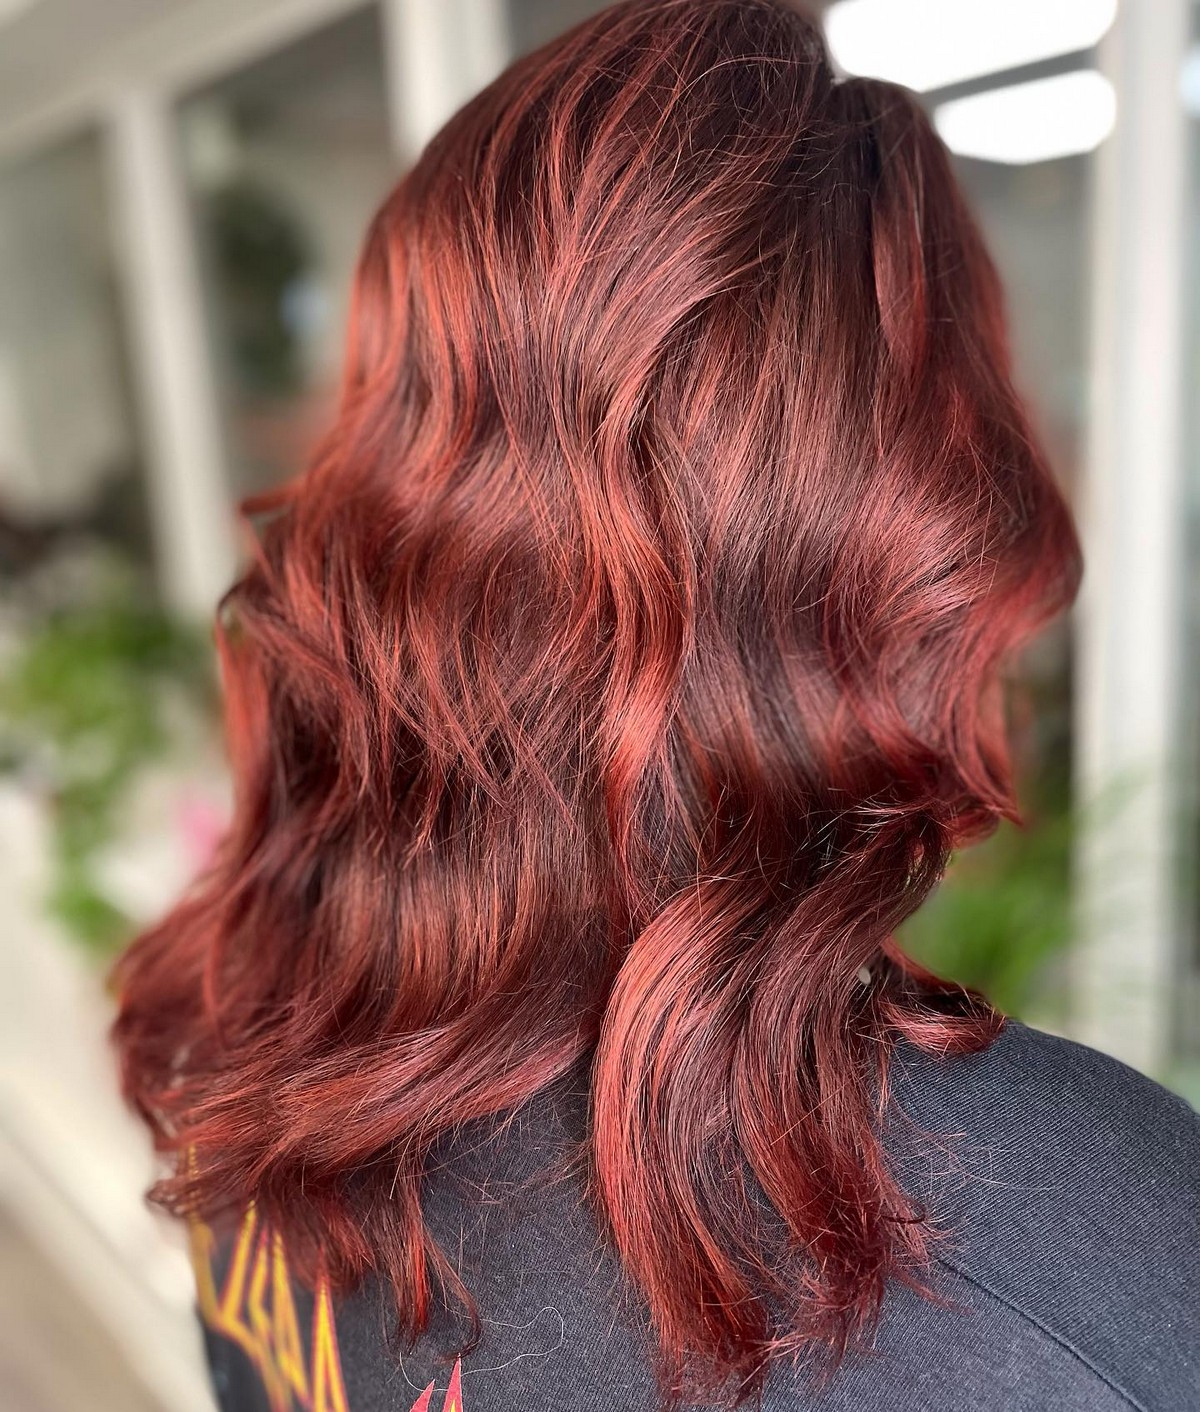 Red Layer Of Blunt, Wavy Hair